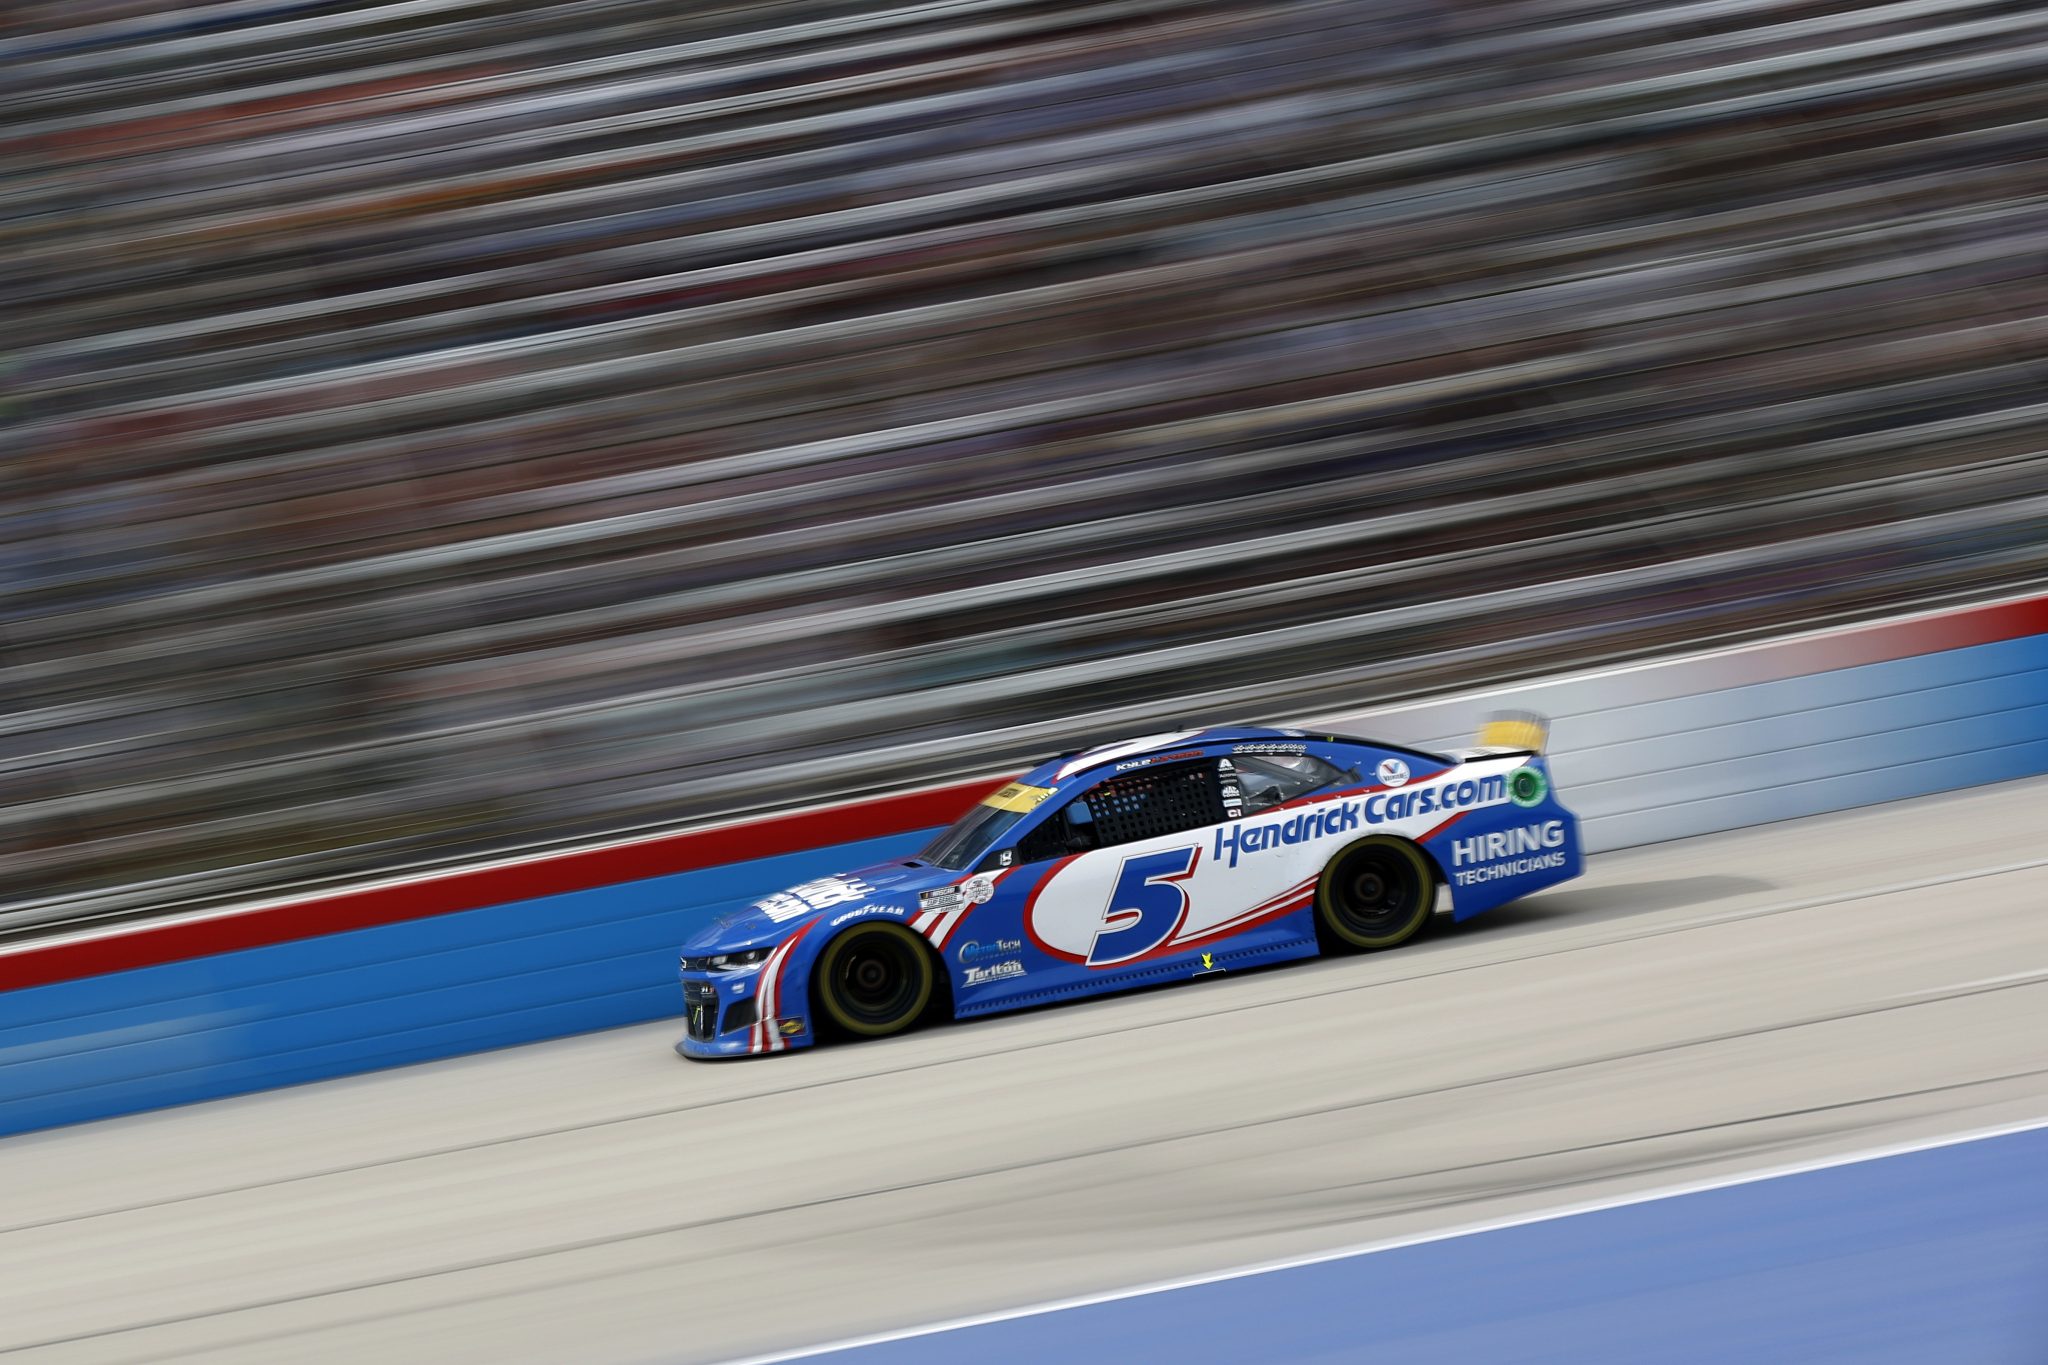 FORT WORTH, TEXAS - OCTOBER 17: Kyle Larson, driver of the #5 HendrickCars.com Chevrolet, drives during the NASCAR Cup Series Autotrader EchoPark Automotive 500 at Texas Motor Speedway on October 17, 2021 in Fort Worth, Texas. (Photo by Jared C. Tilton/Getty Images) | Getty Images